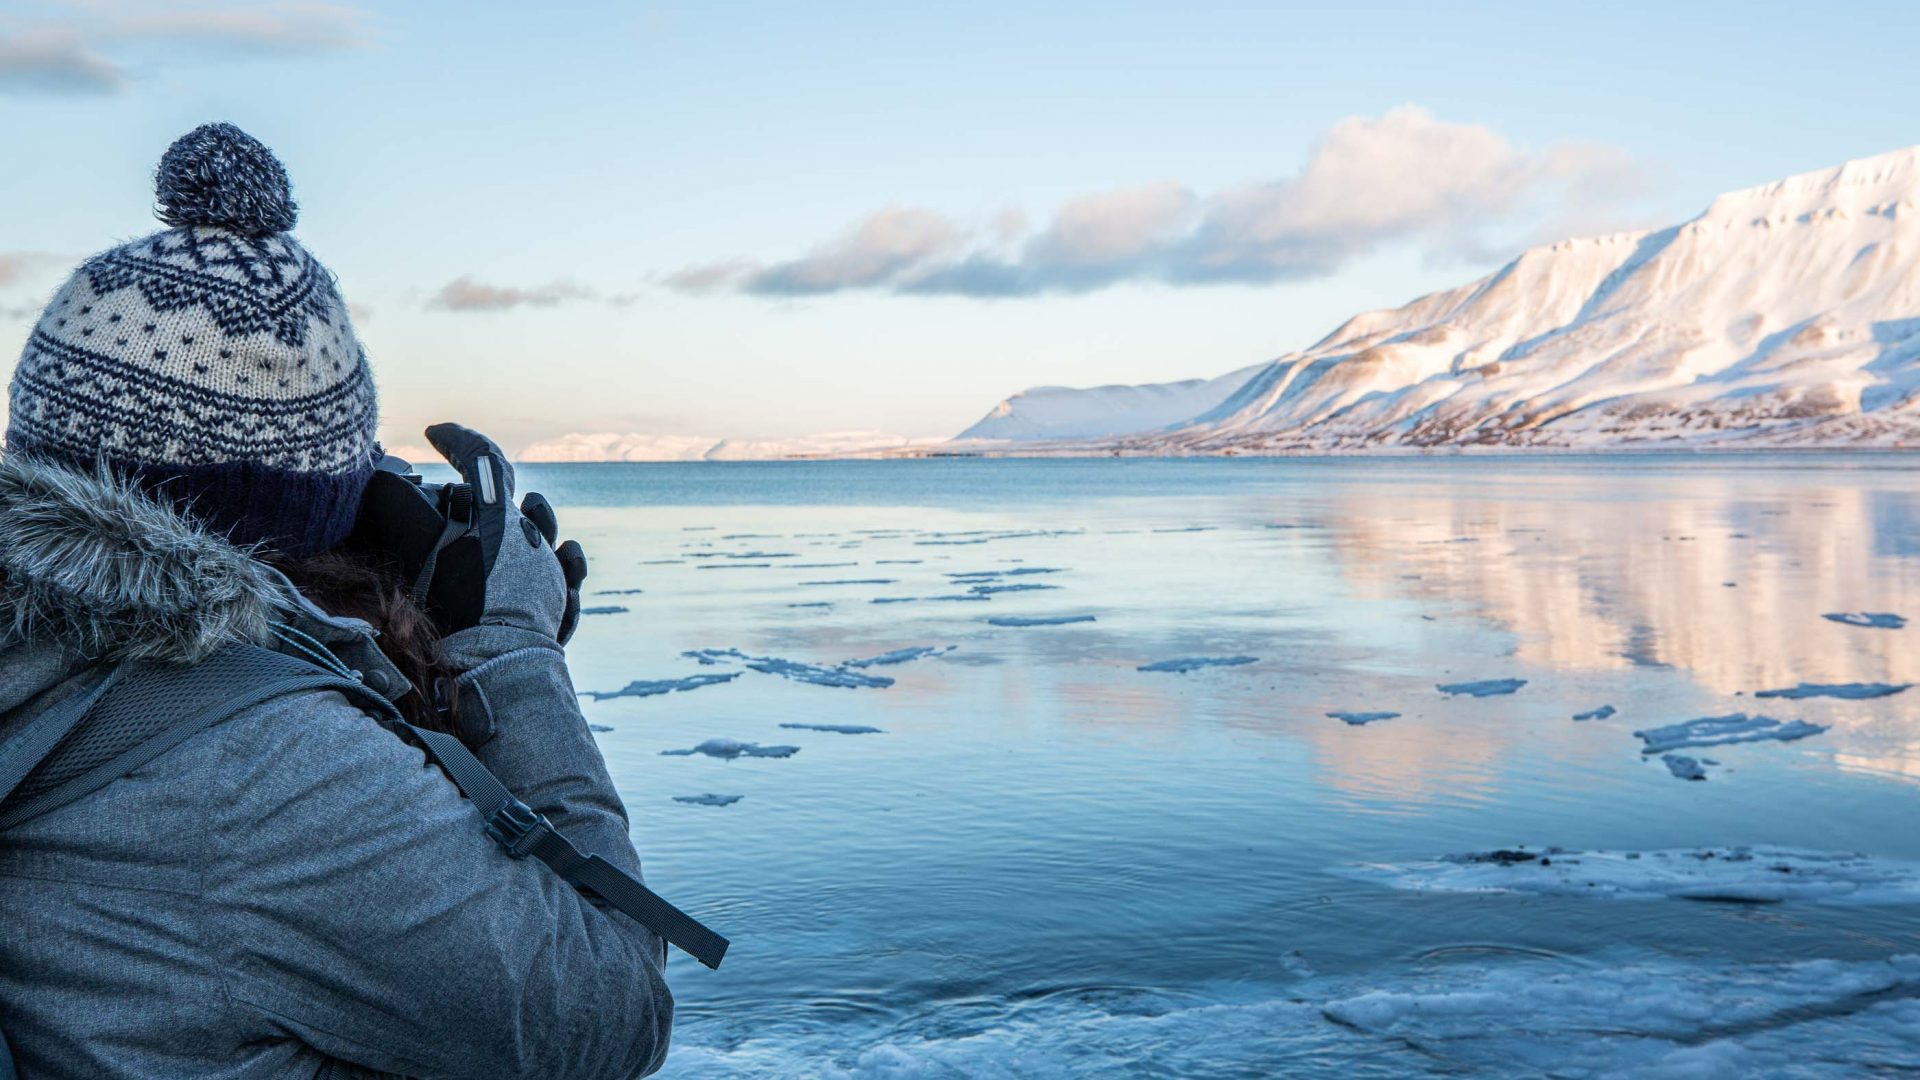 “More like war photography”: Photographing the Arctic during a climate crisis